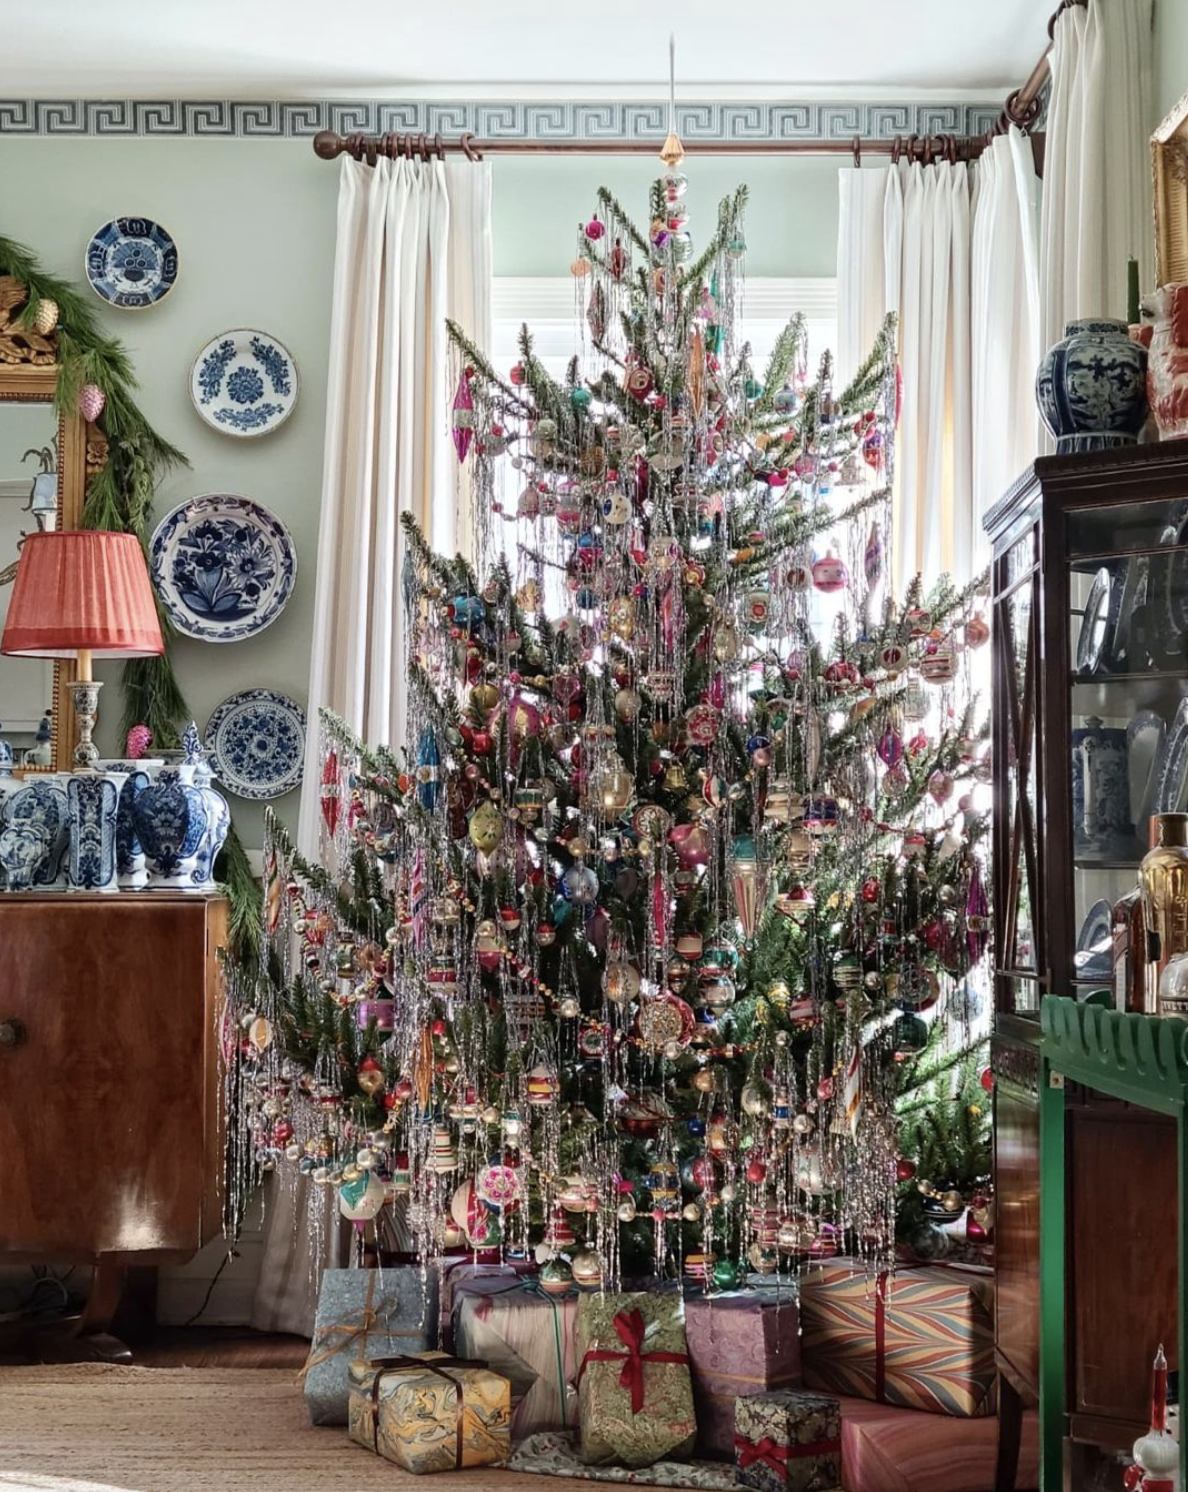 Fake trees date back to 19th century